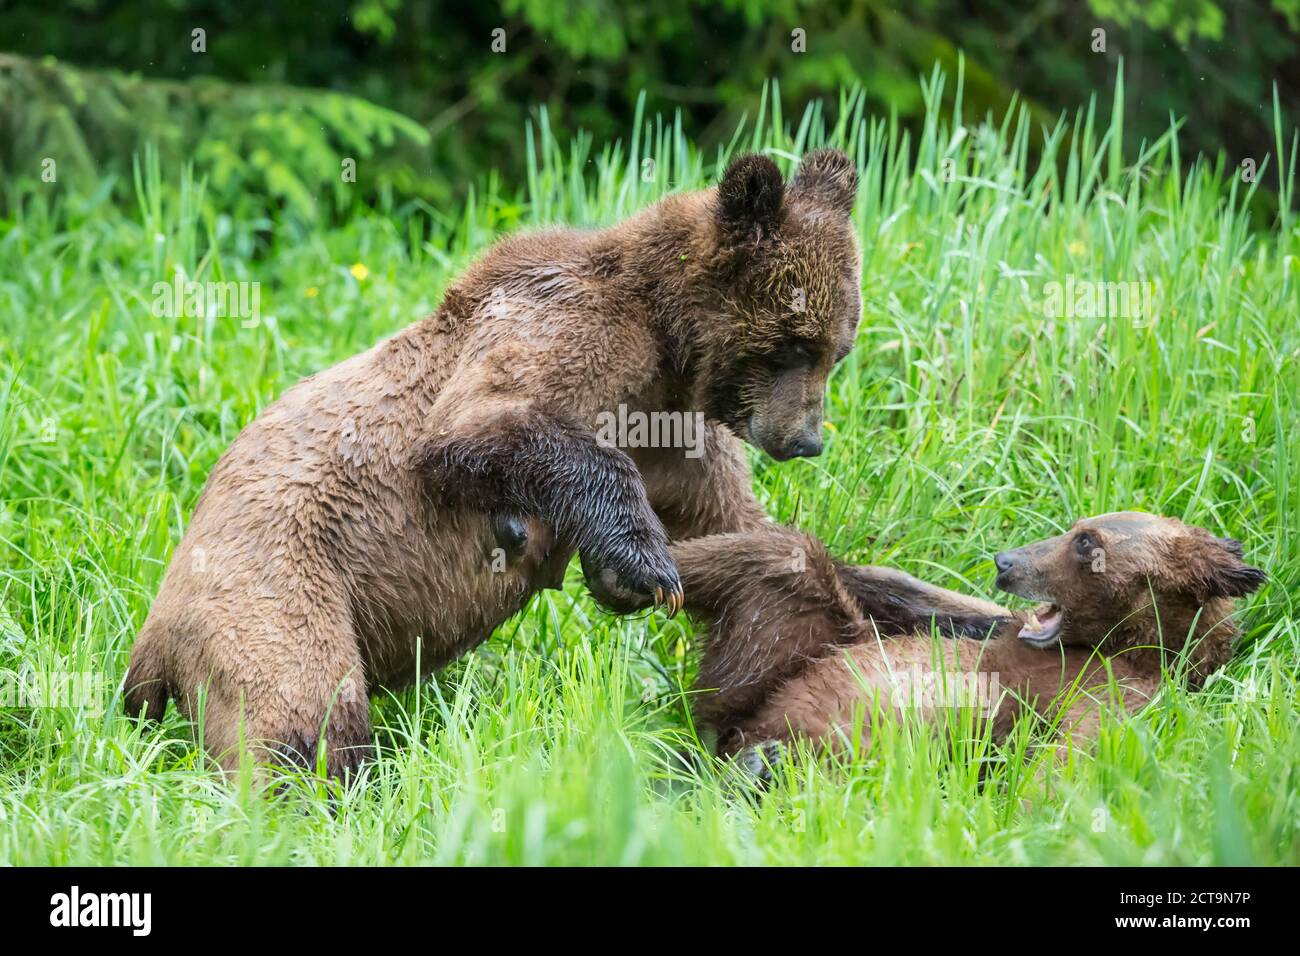 Canada, Khutzeymateen Grizzly Bear Sanctuary, Playing grizzly bears Stock Photo